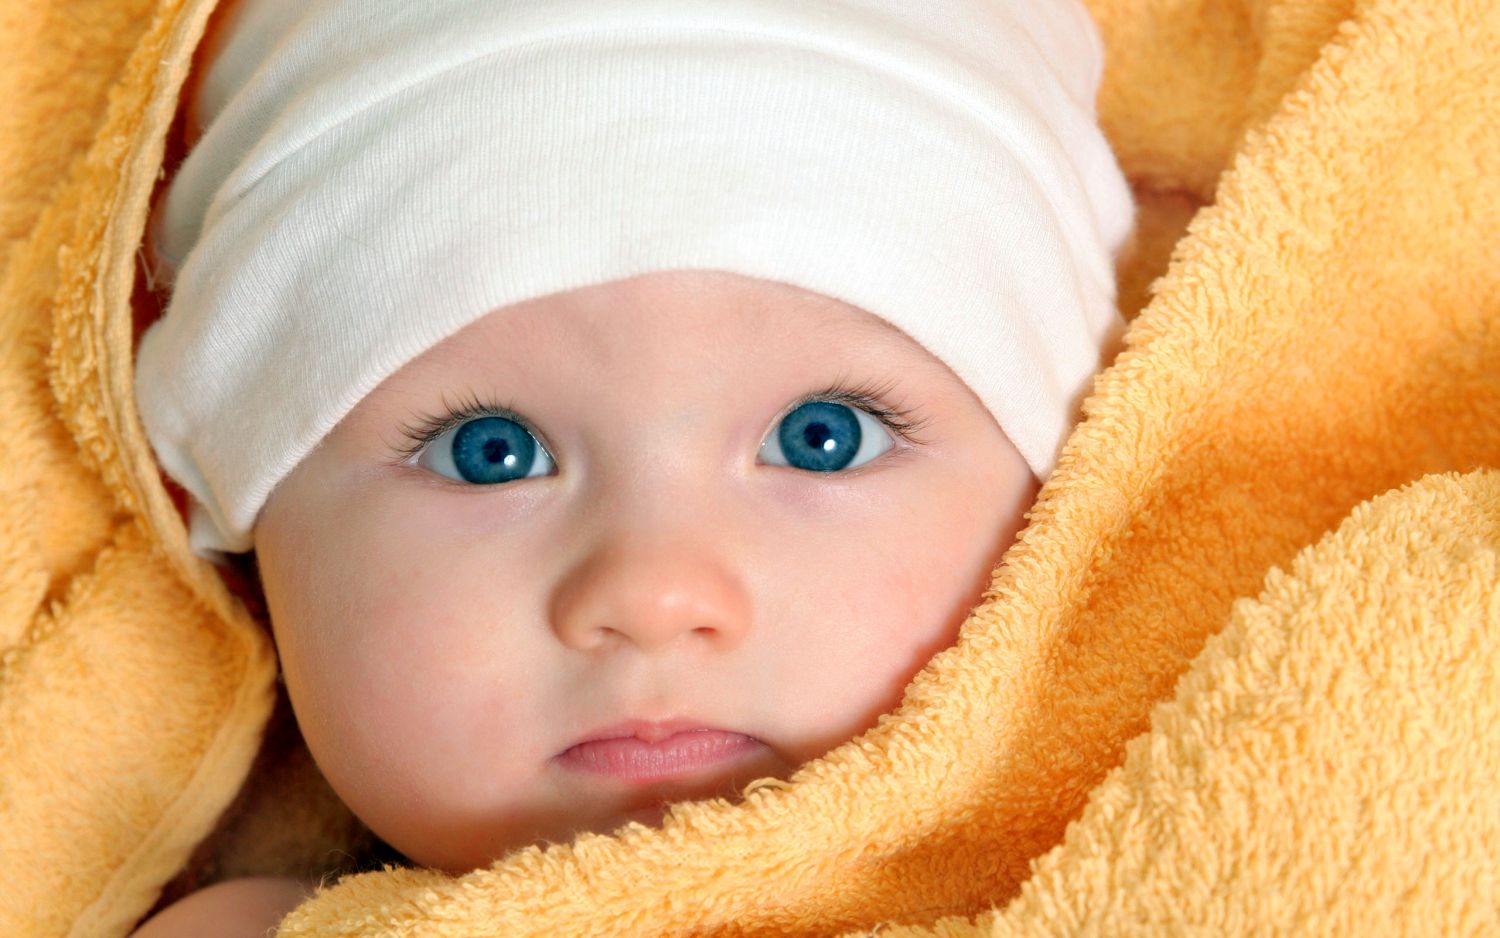 Cute Baby Wallpapers In Hd For Desktop - Baby Pic Free Download - HD Wallpaper 